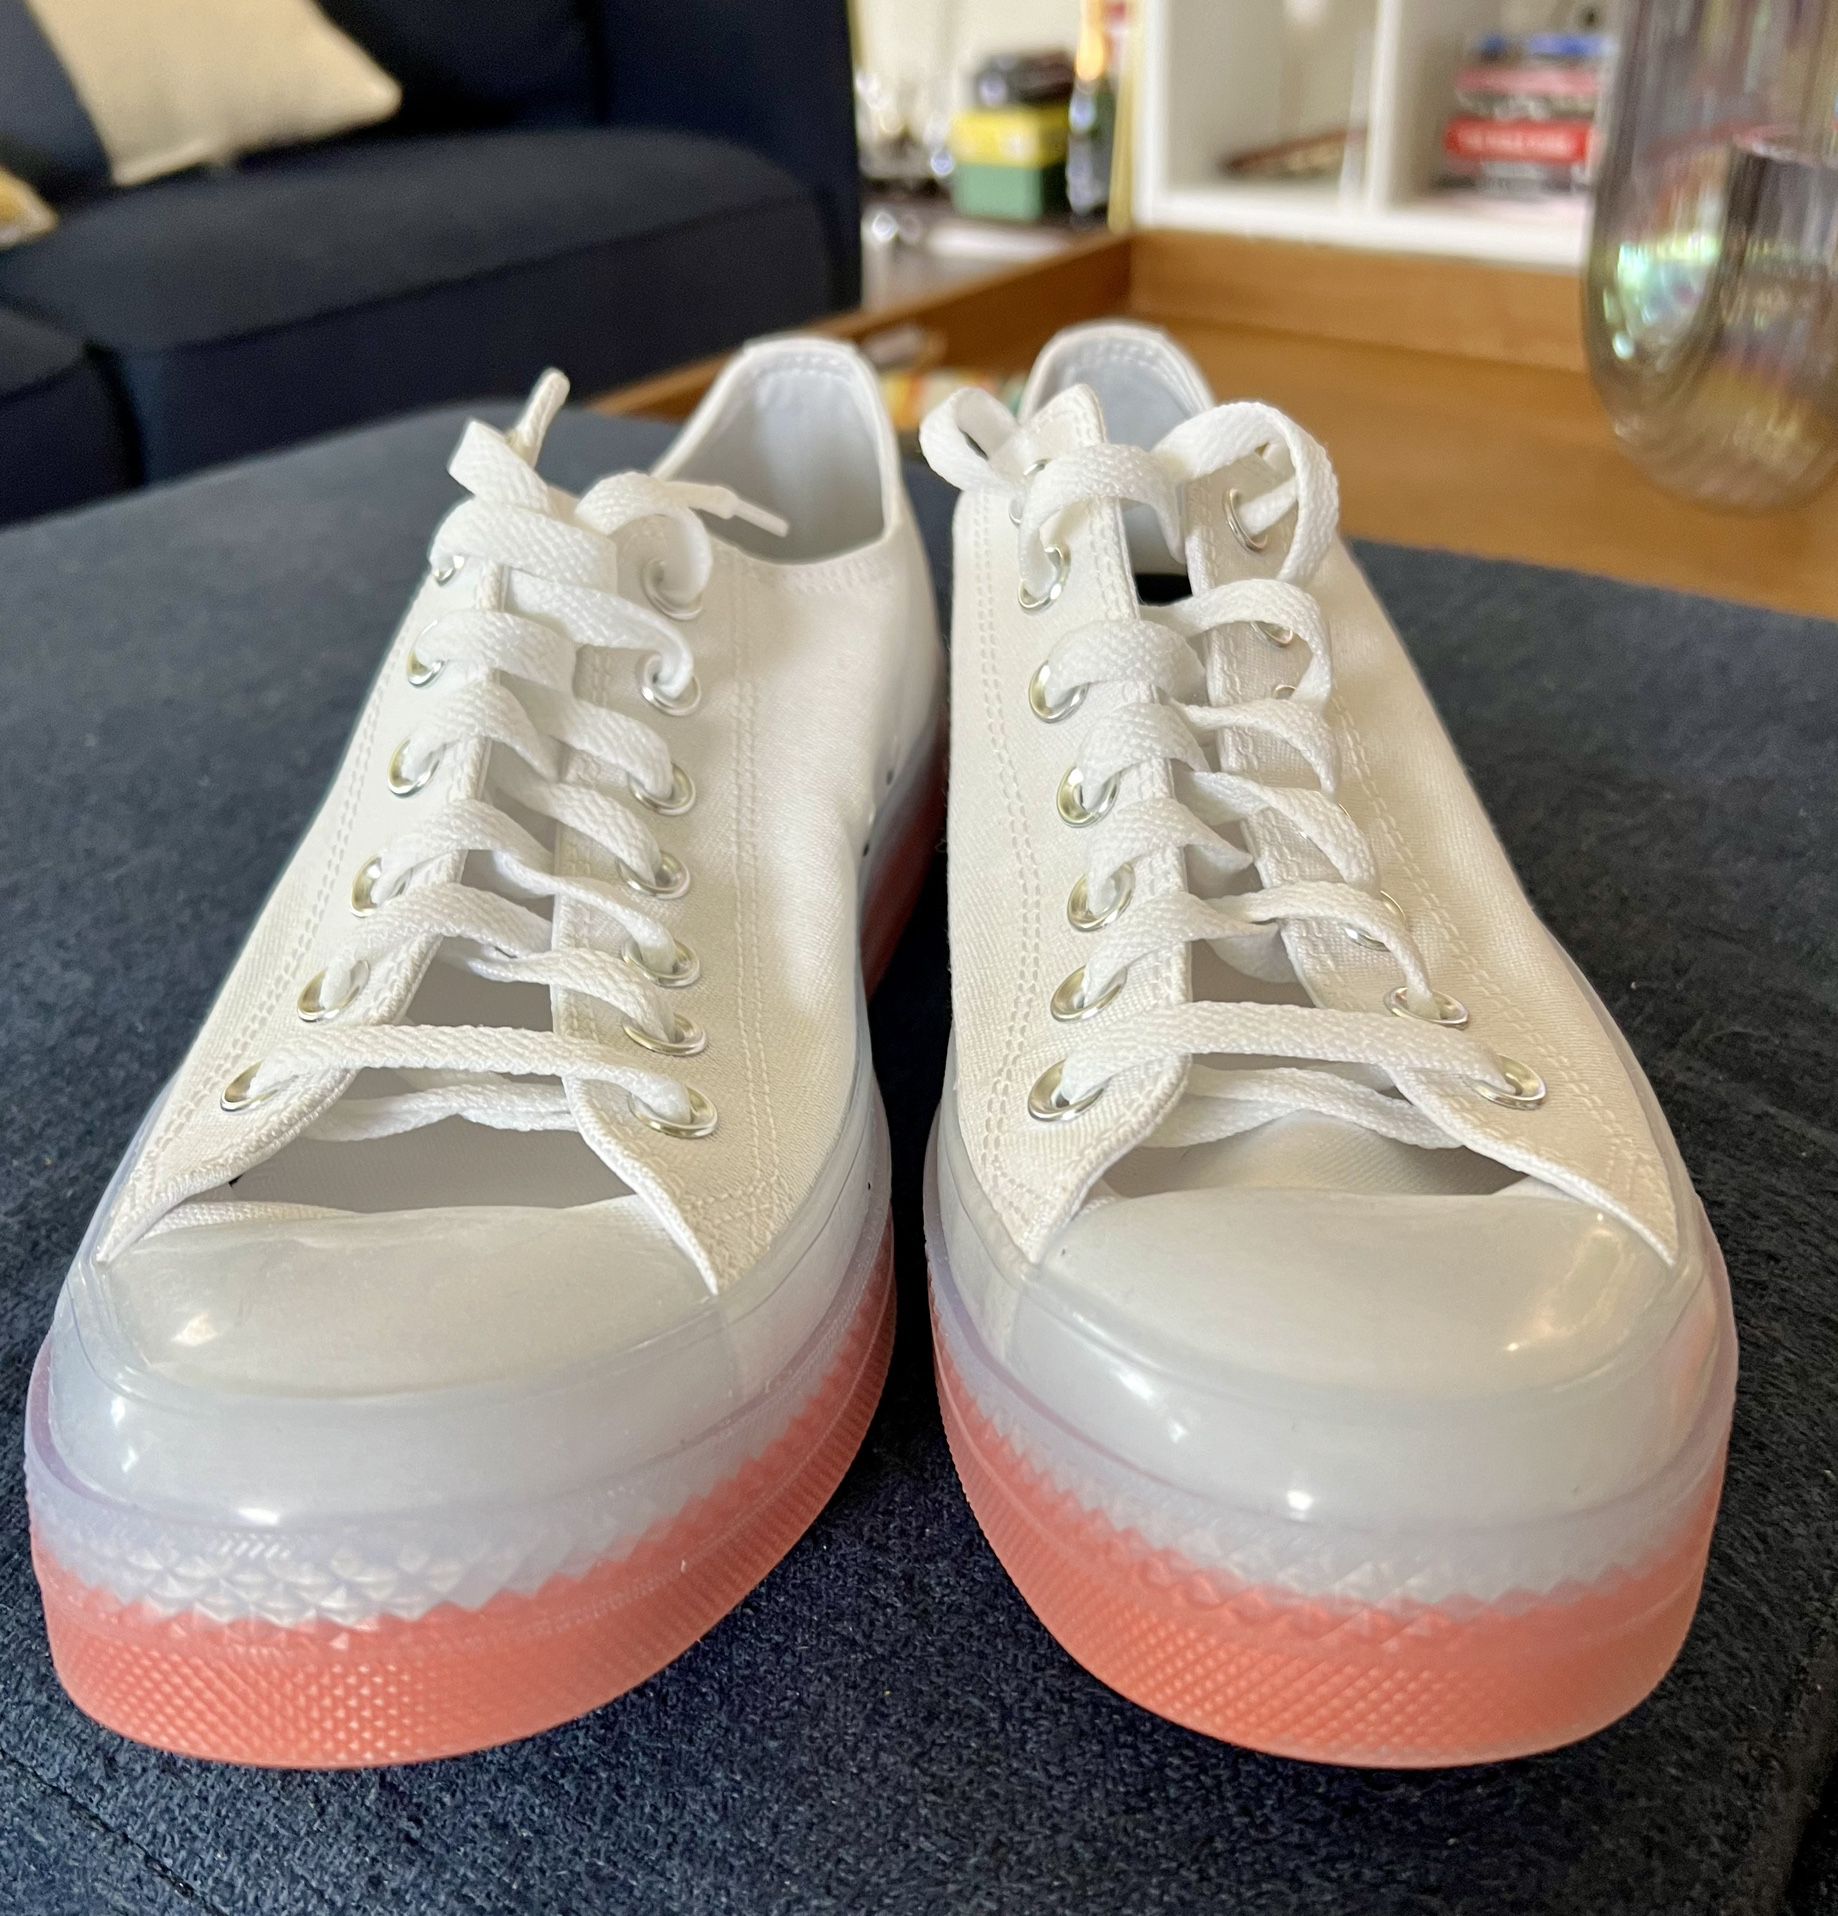 Size 10 - Converse All Star Low Top White (Red/Orange sole)